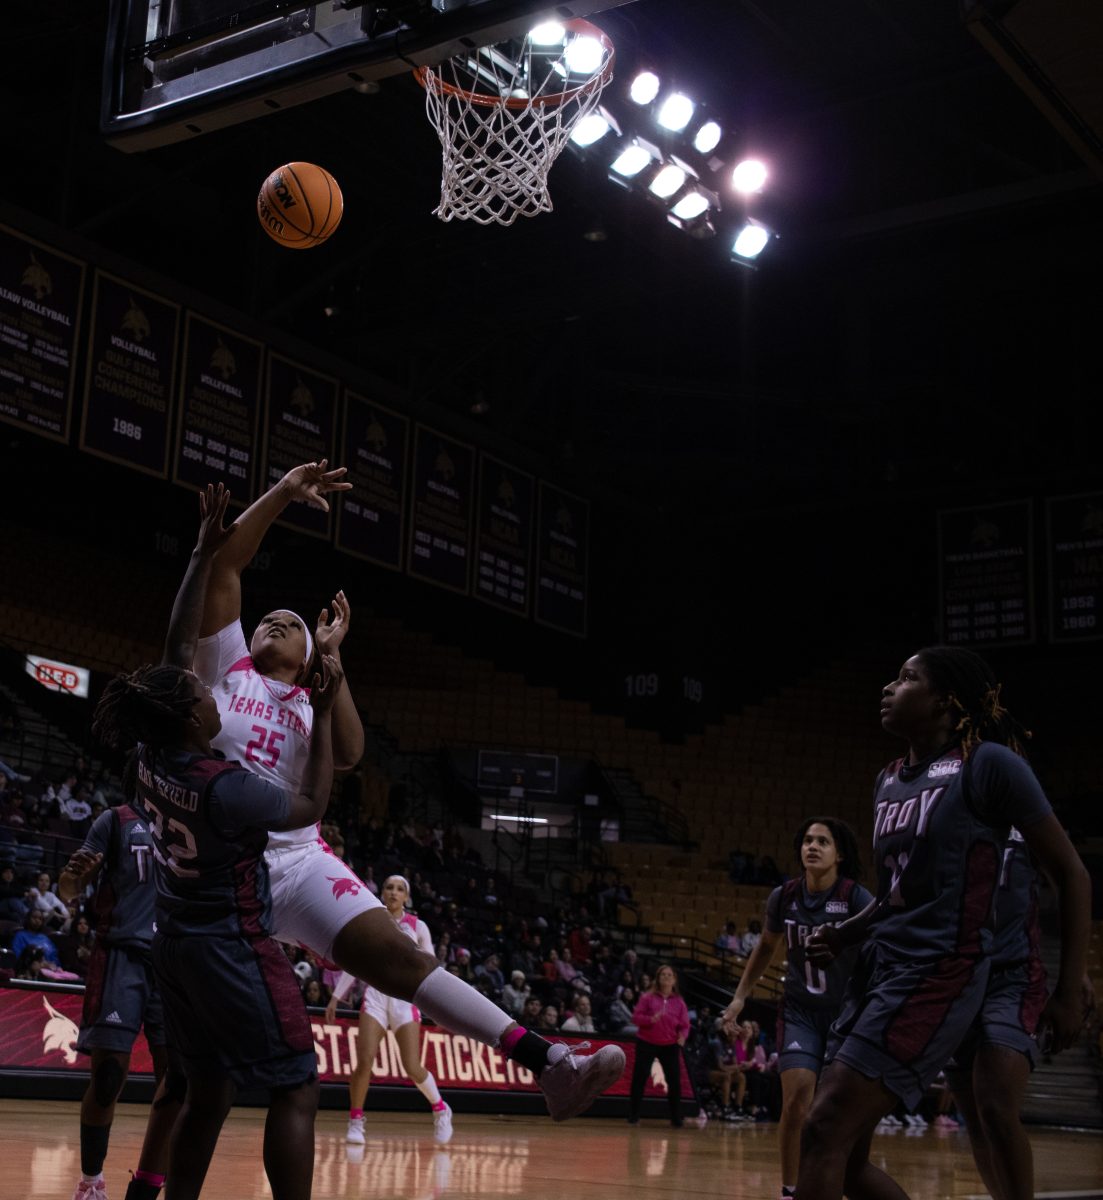 Texas State redshirt senior forward Lauryn Thompson (25) goes for a layup against Troy University, Thursday, Feb. 2, 2023, at Strahan Arena. The Bobcats lost 84-78.